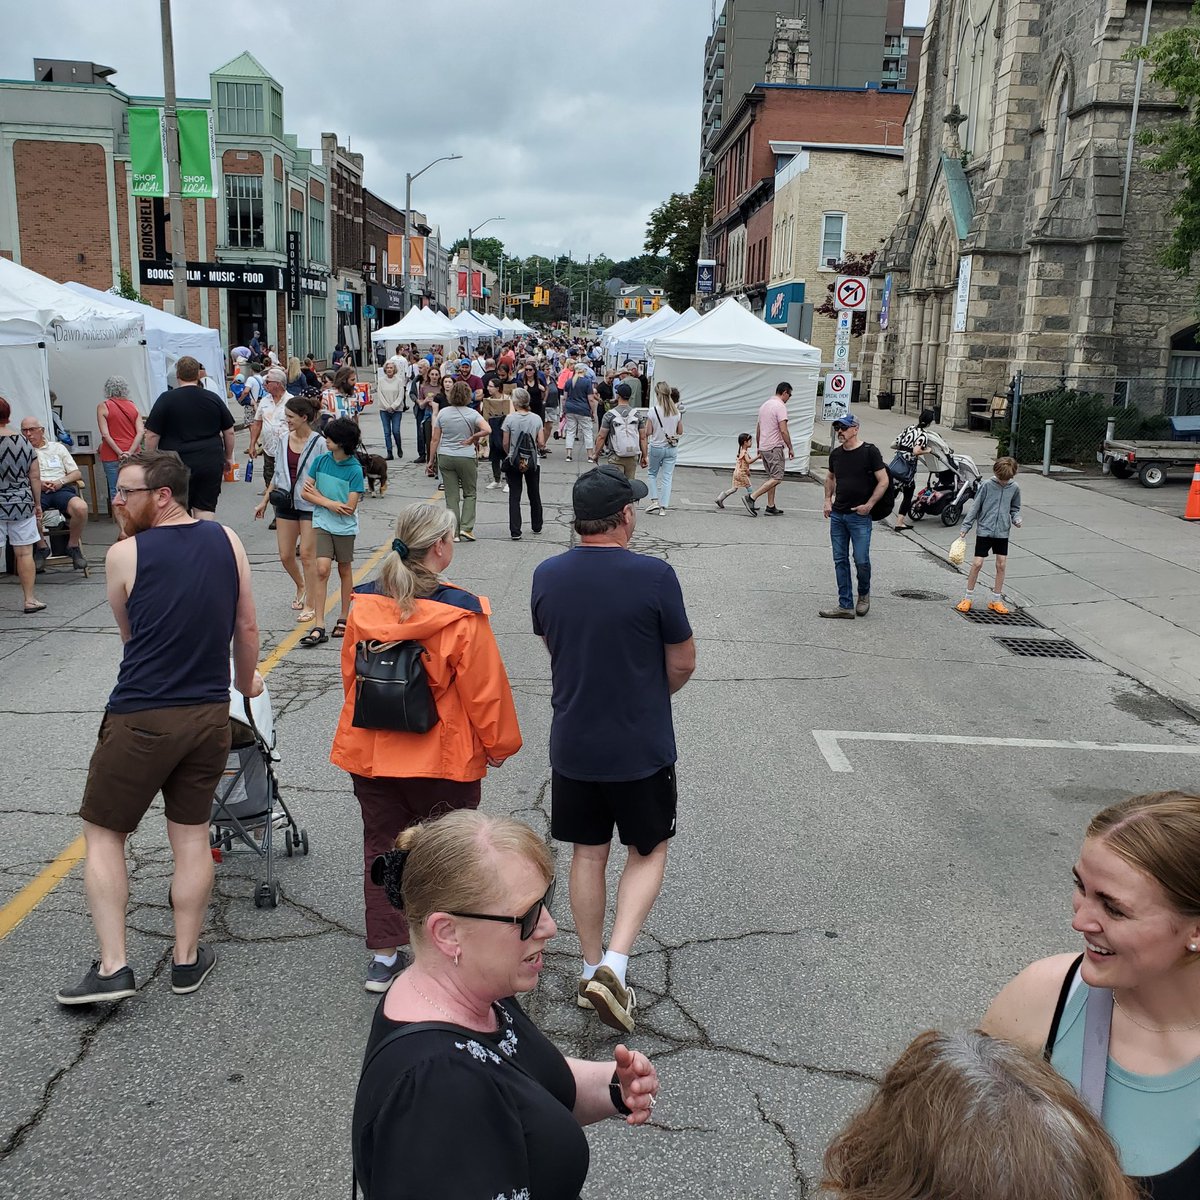 The rain is staying at bay for another successful #ArtOnTheStreet in #DowntownGuelph SO MUCH talent in this city!